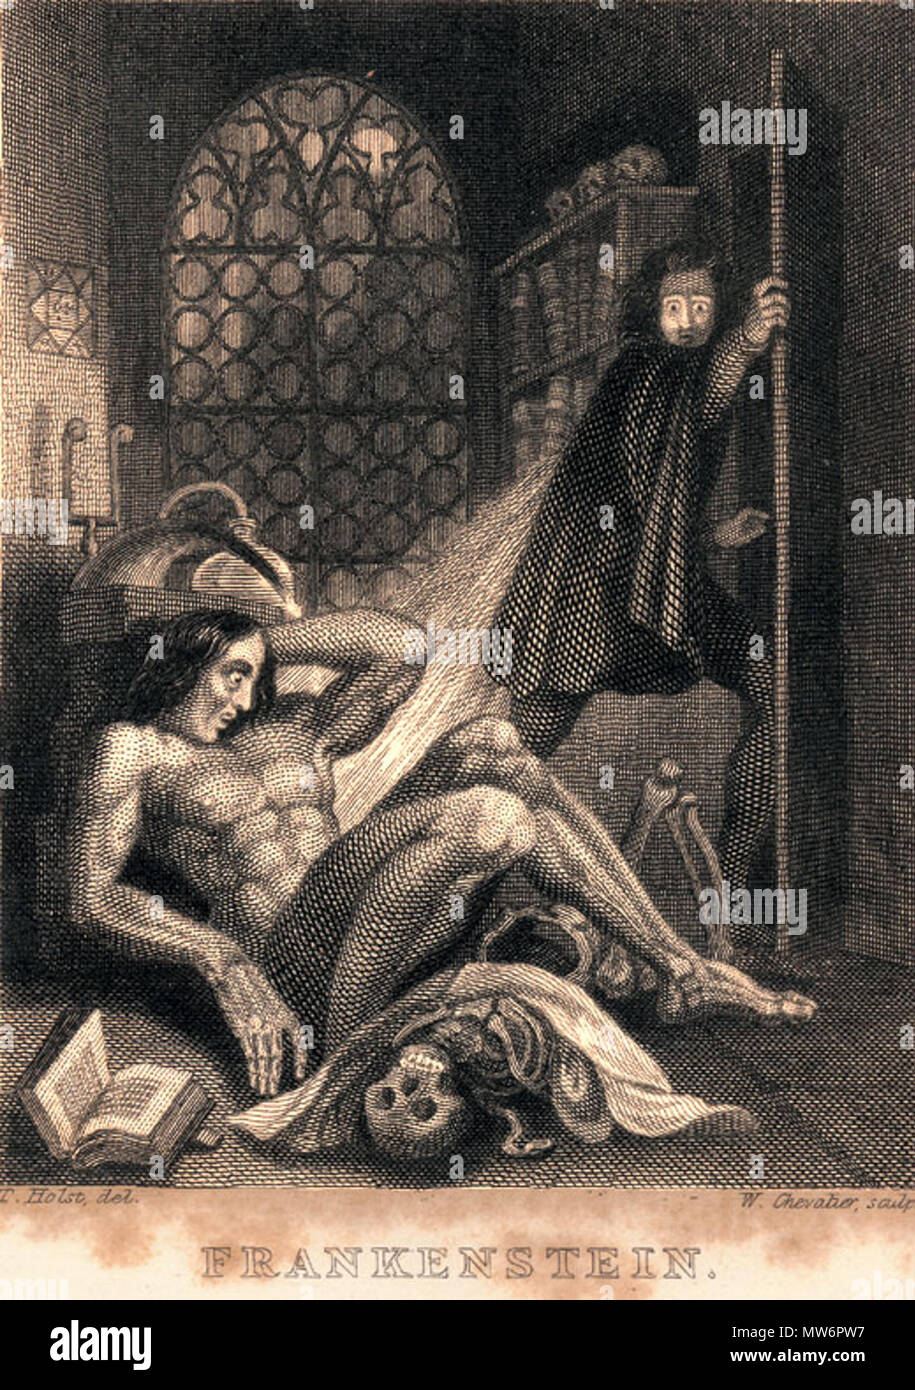 . English: Frontispiece to Mary Shelley, Frankenstein published by Colburn and Bentley, London 1831 Steel engraving in book 93 x 71 mm . 1831. Theodor von Holst 217 Frankenstein engraved Stock Photo